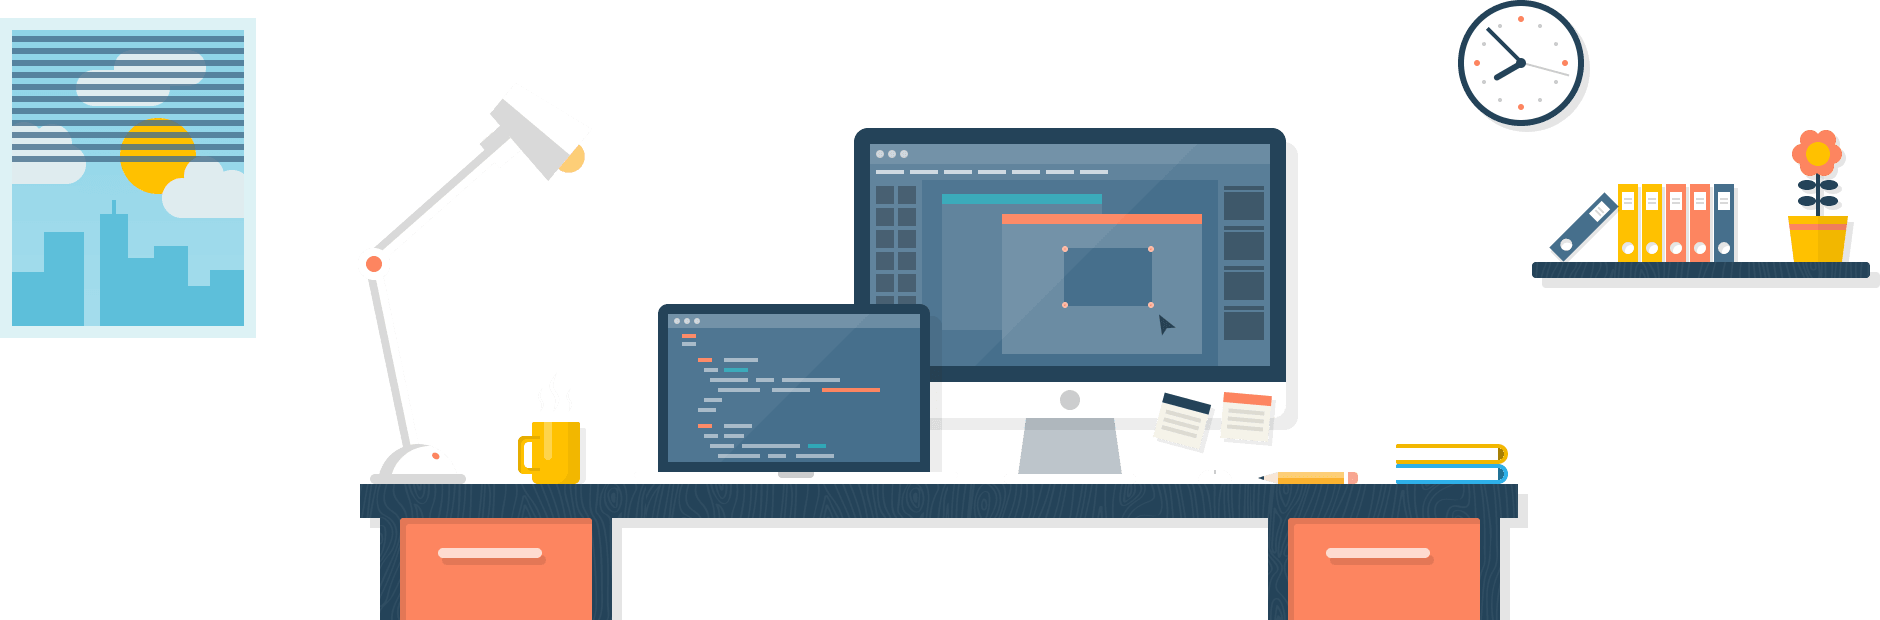 About Keev Workspace - Front End Developer Vector (1880x620)